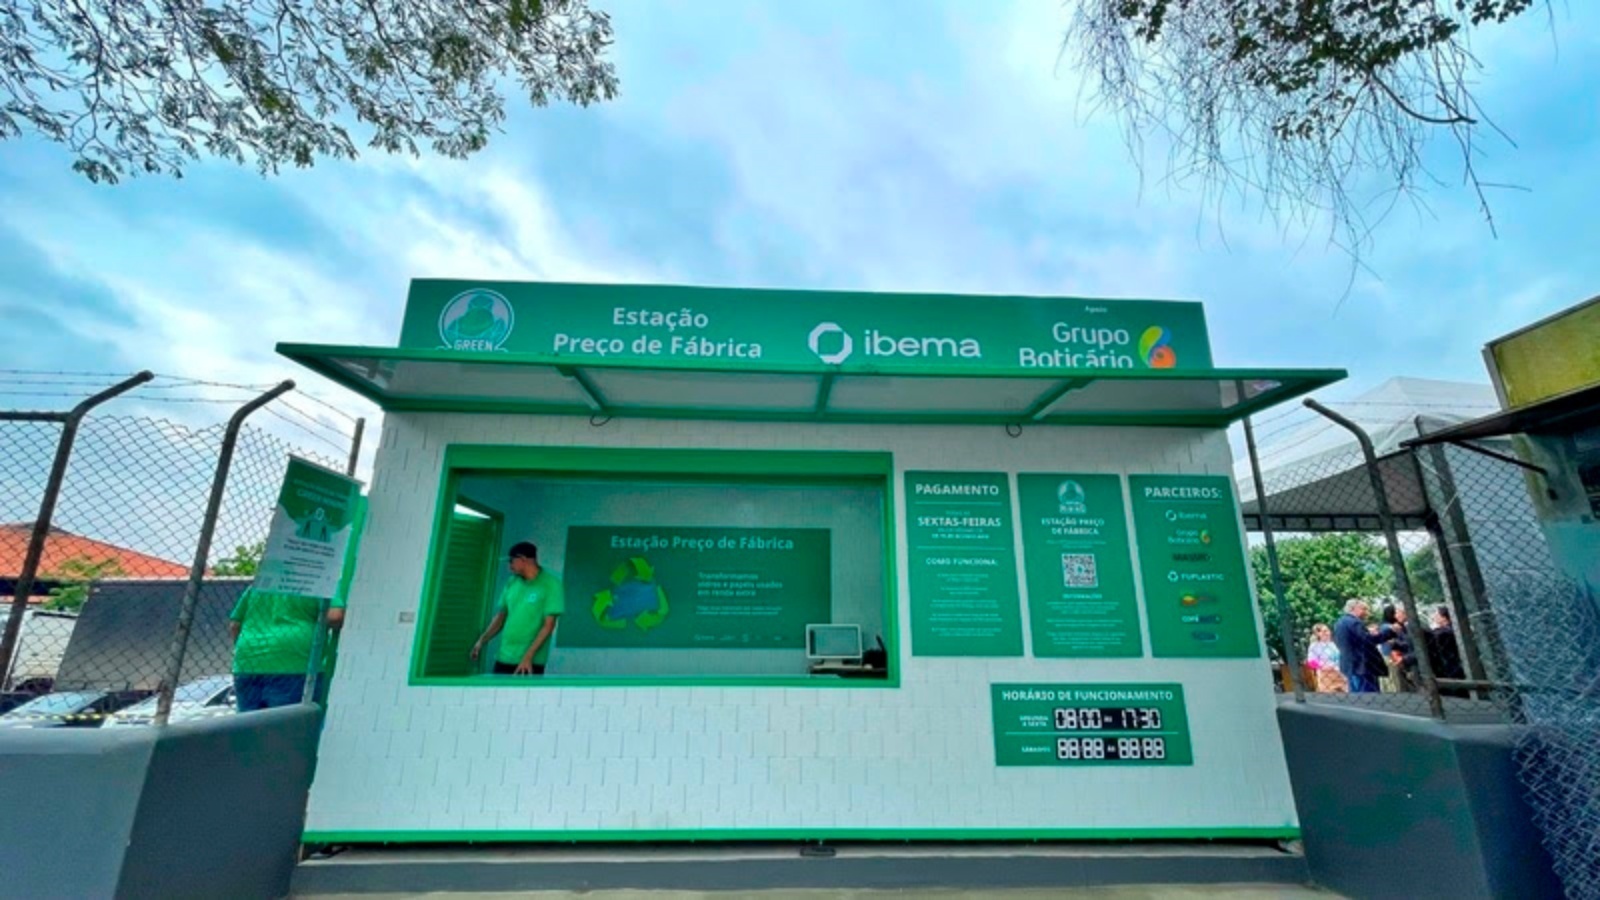 Recycled that turns into a pix, the Estação Preço de Fabrica project is launched in Embu